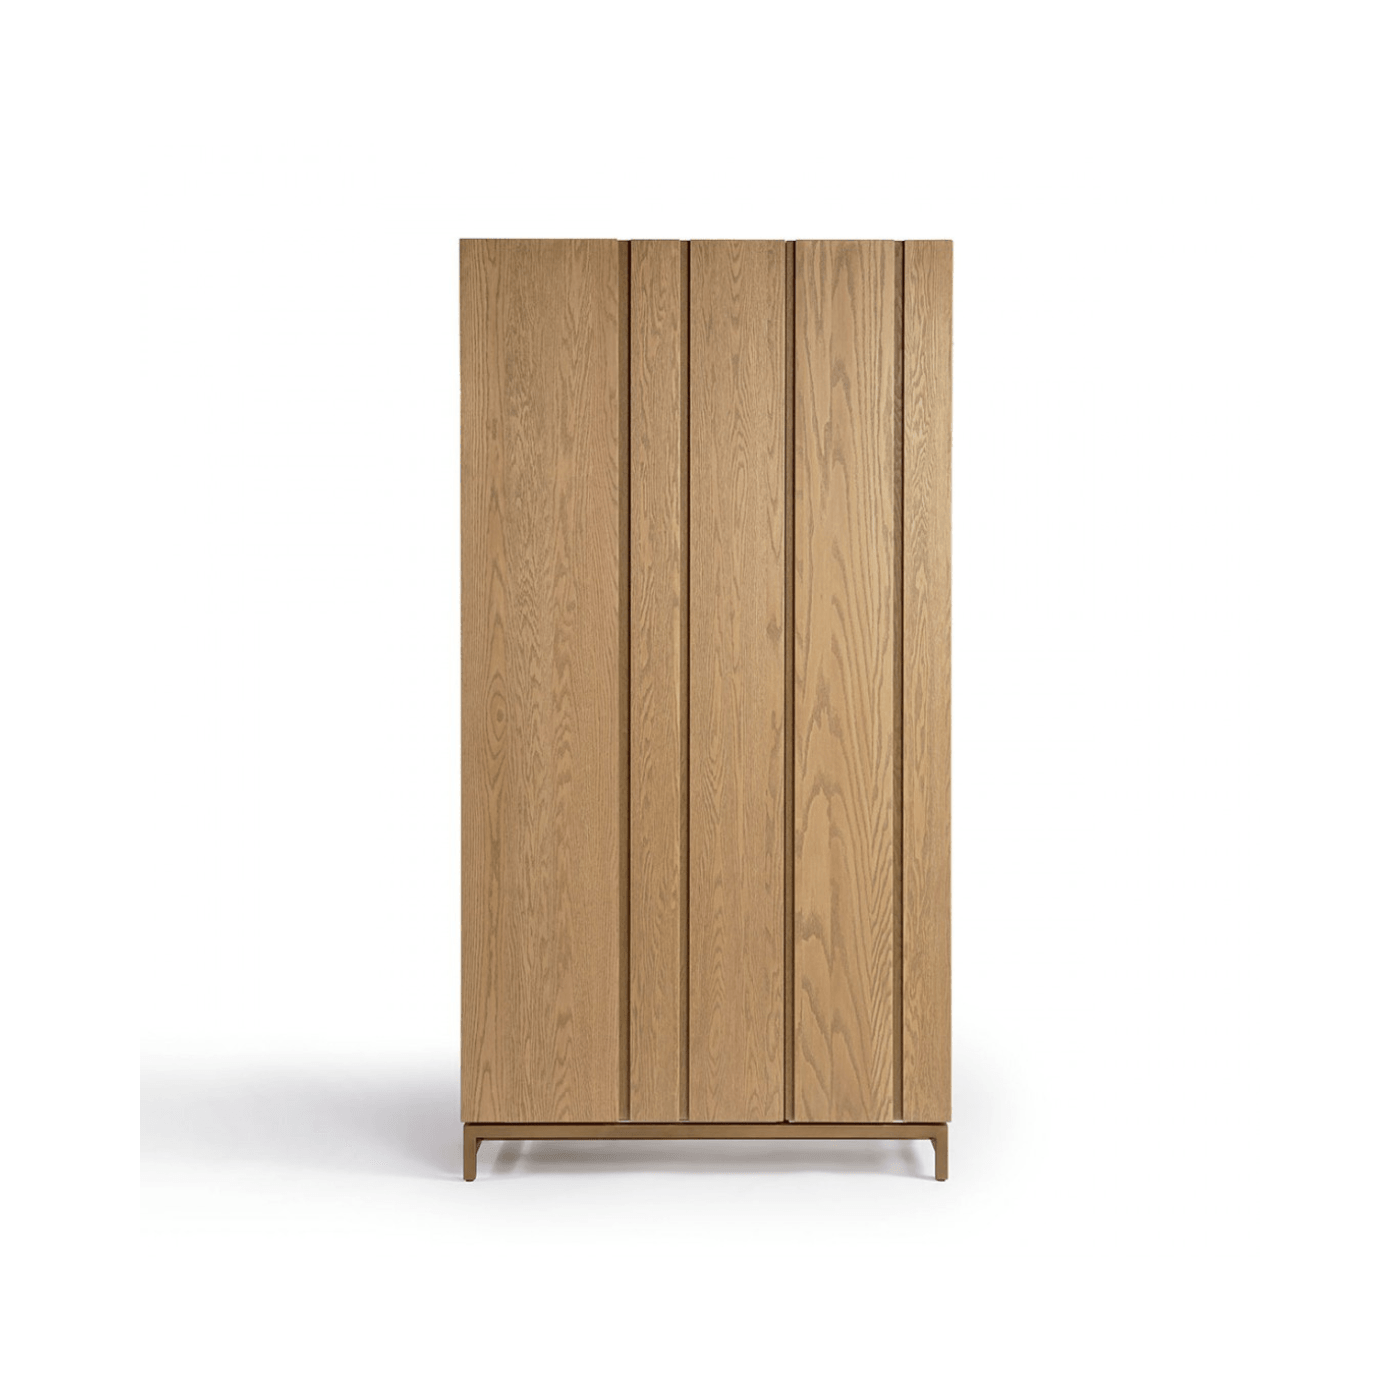 Menorca Natural Oak Tall Cabinet with 3 Doors - Maison Rêves UK